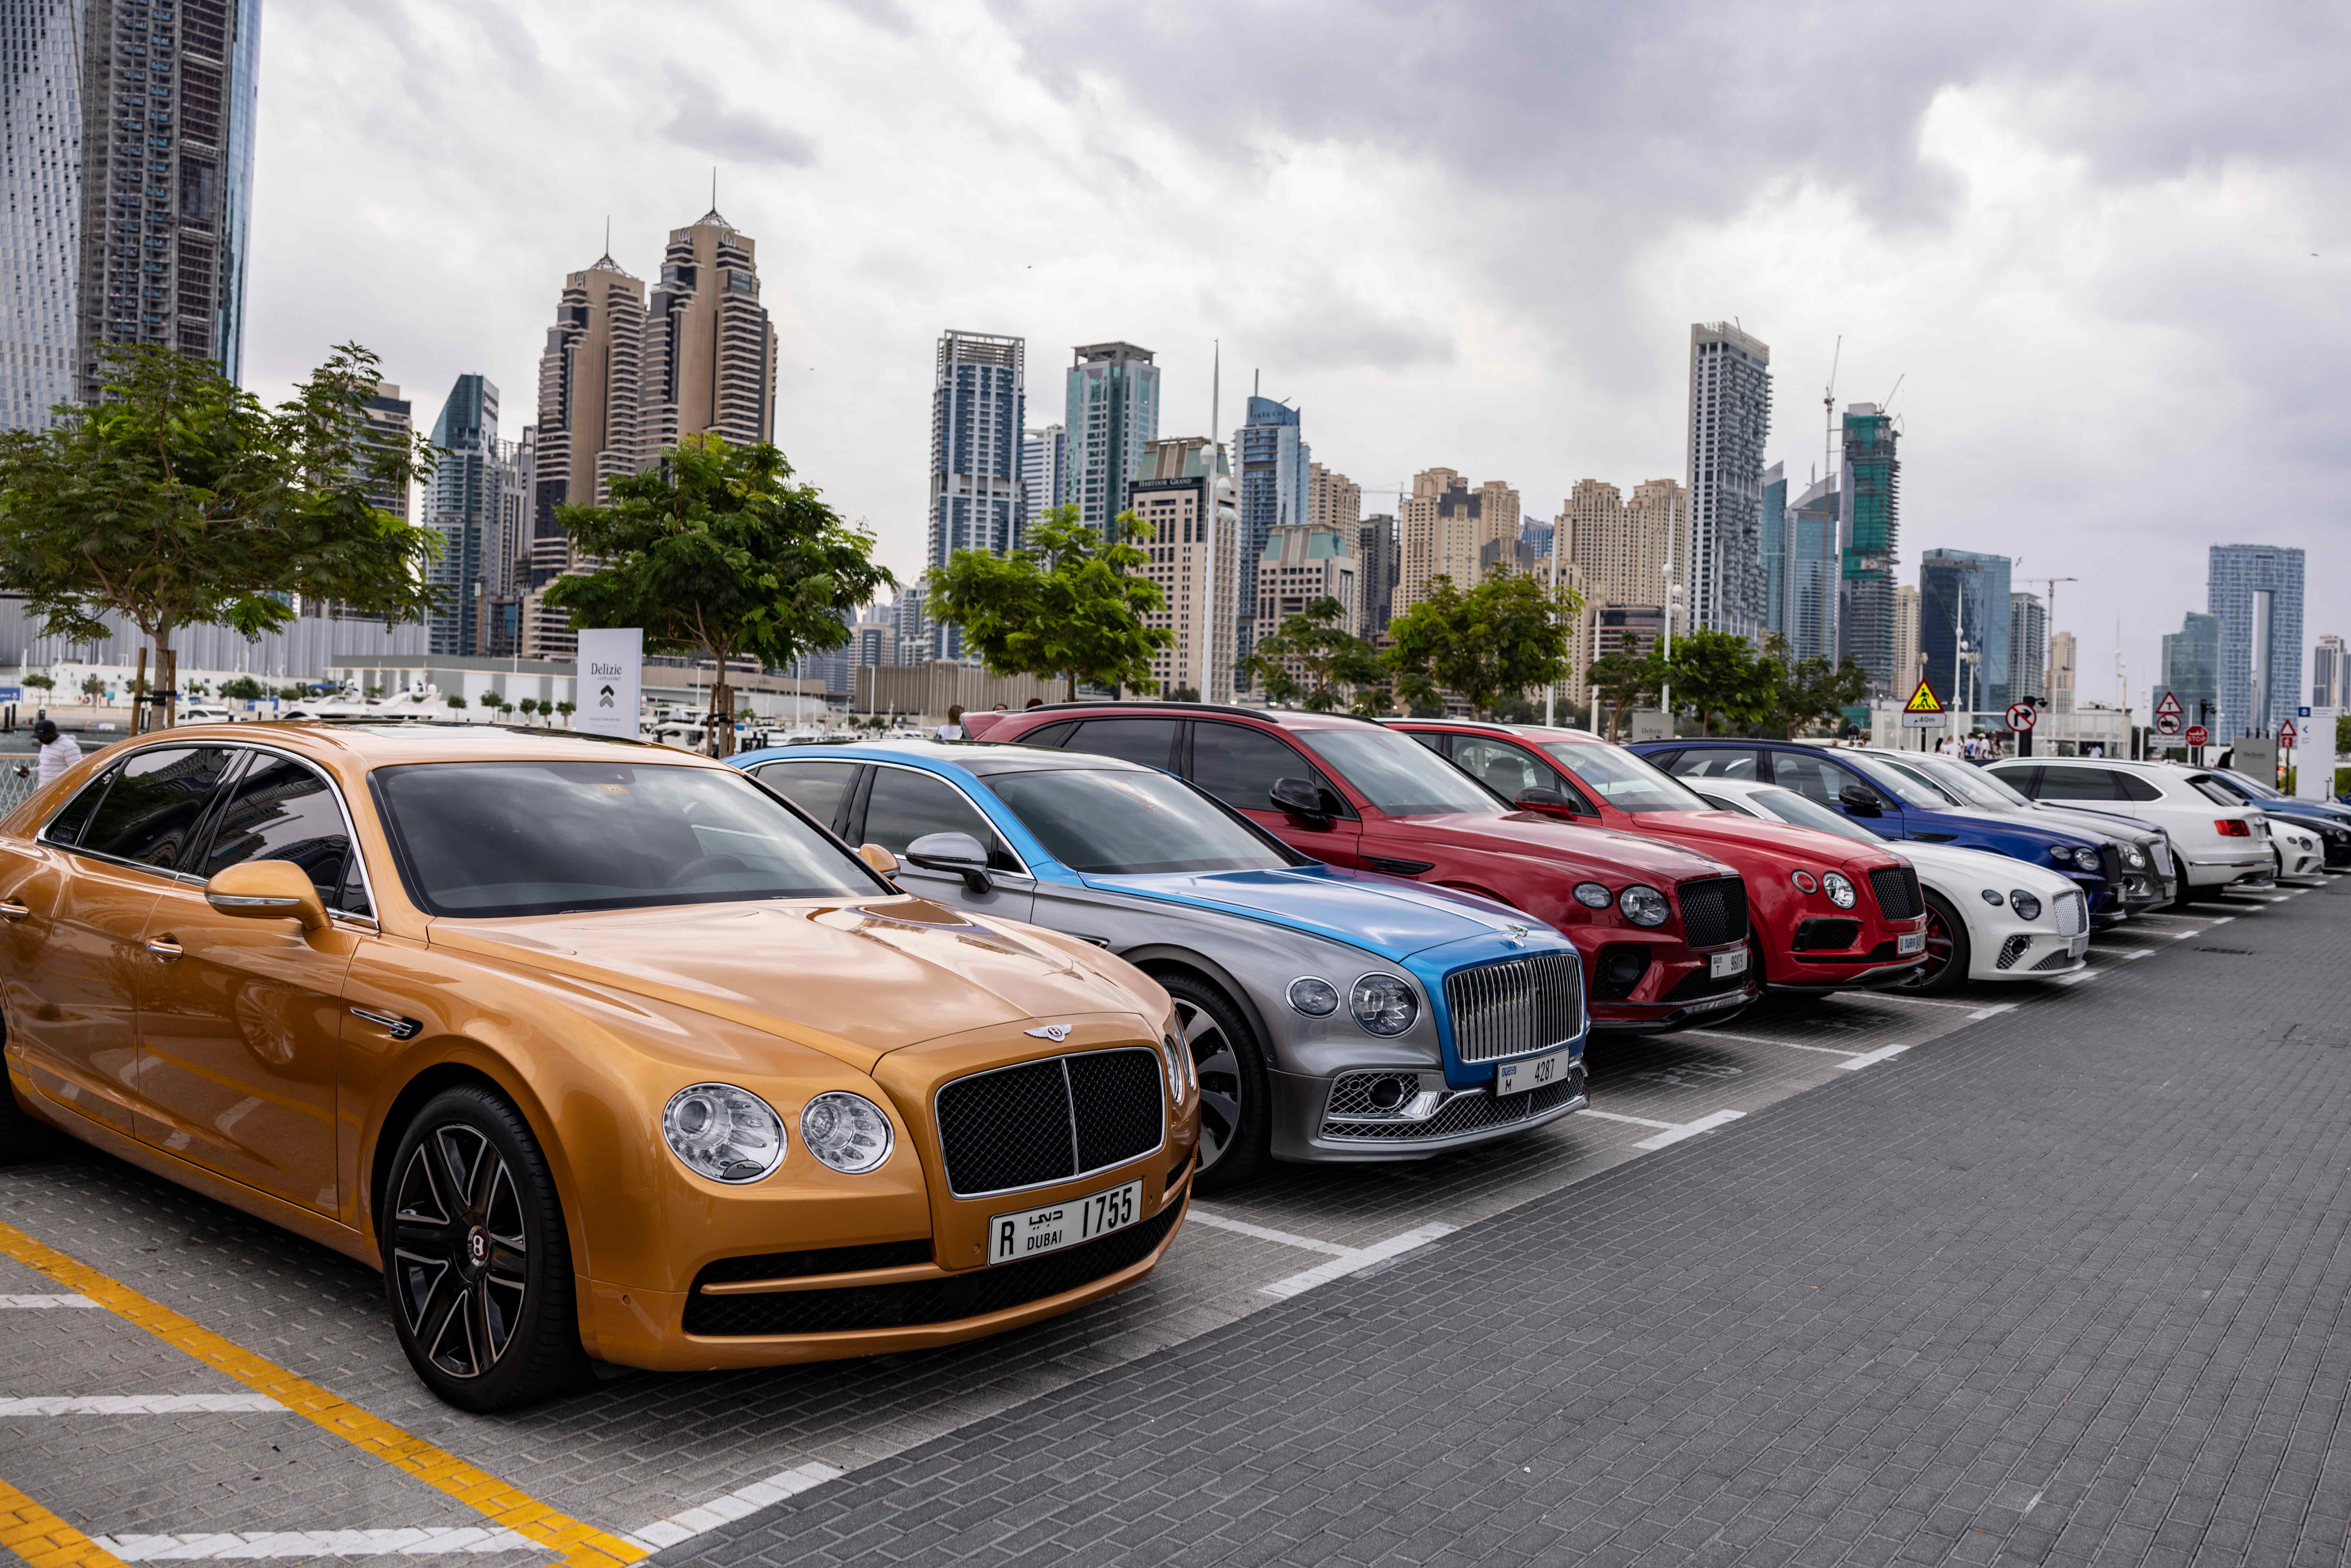 Bentley Bentayga Extended Wheelbase Unveiled For First Time in UAE